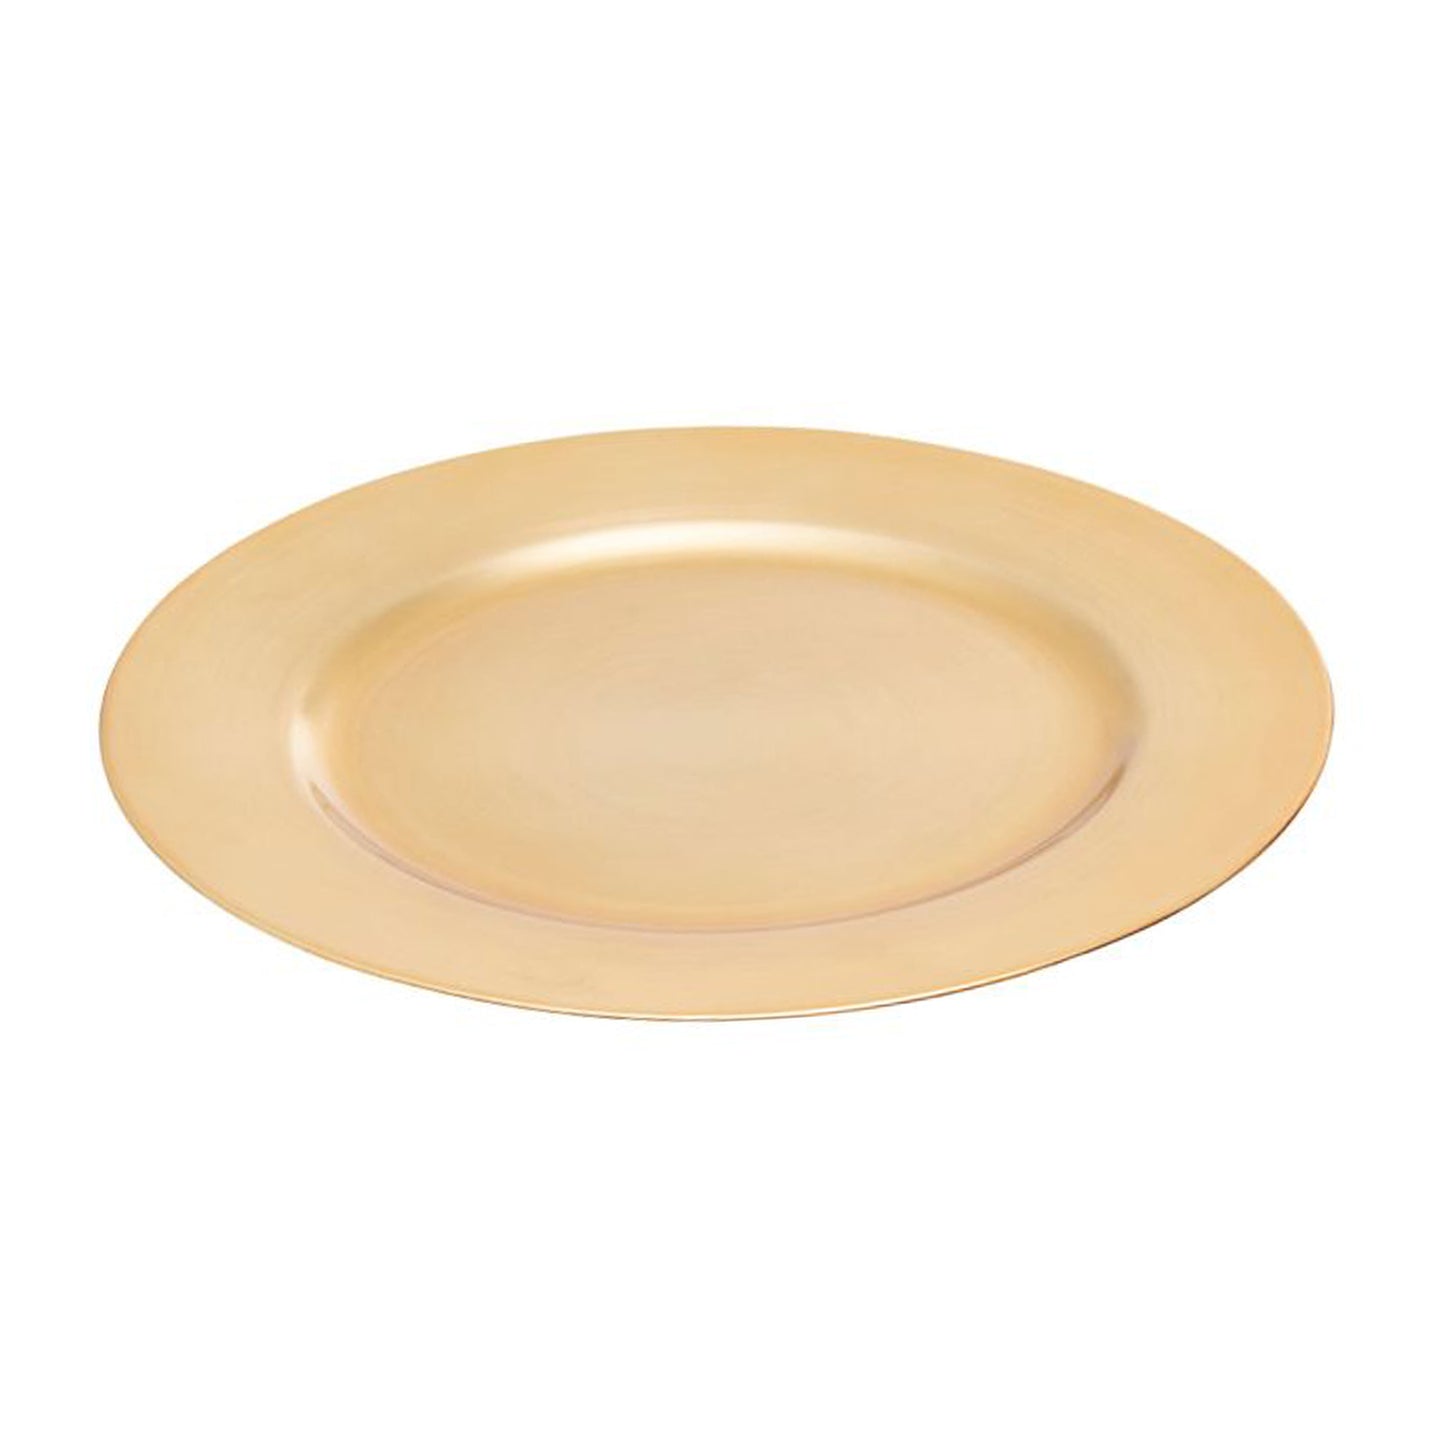 Amelia Glam Antique Gold Charger Plate